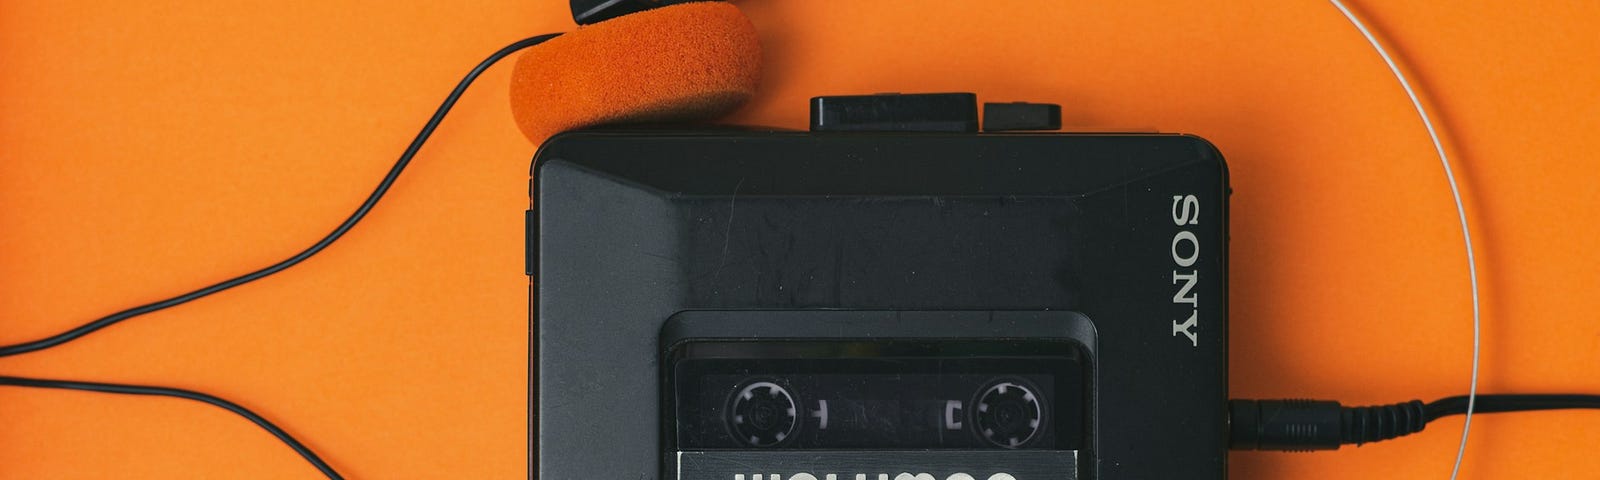 An image of a Walkman tape player